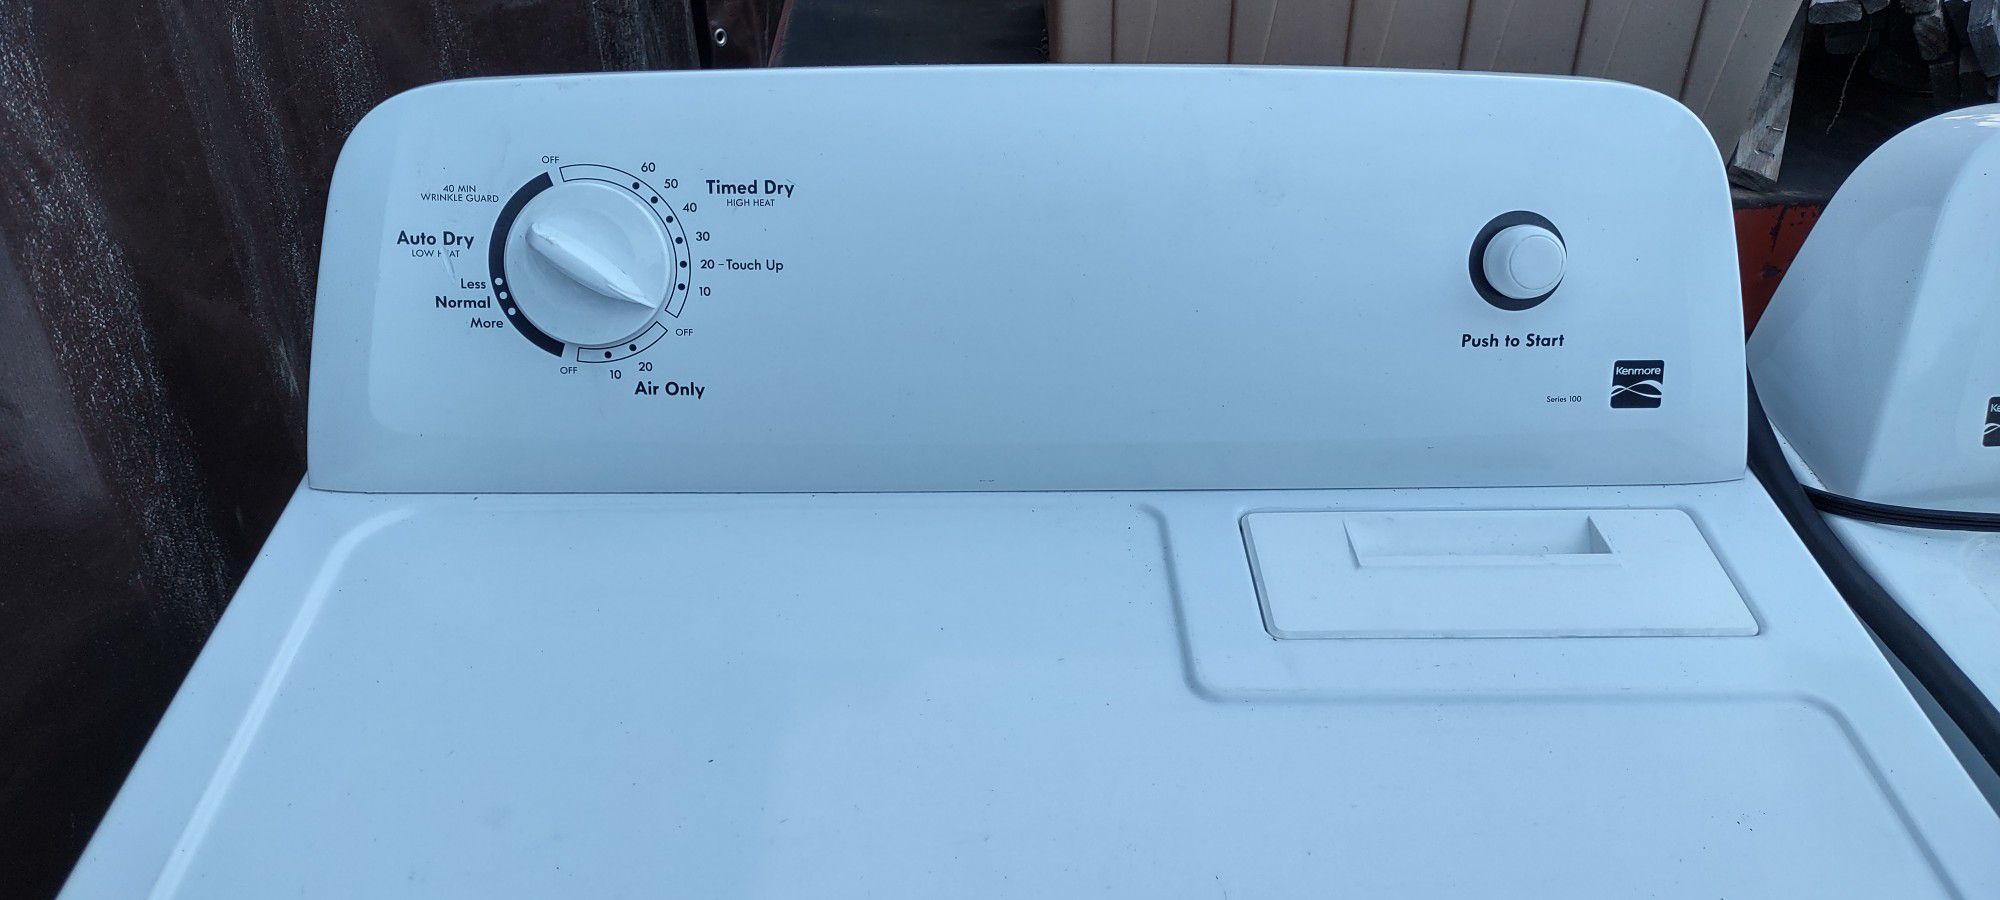 Kenmore Dryer 6.5 Cubic (3 Prong)